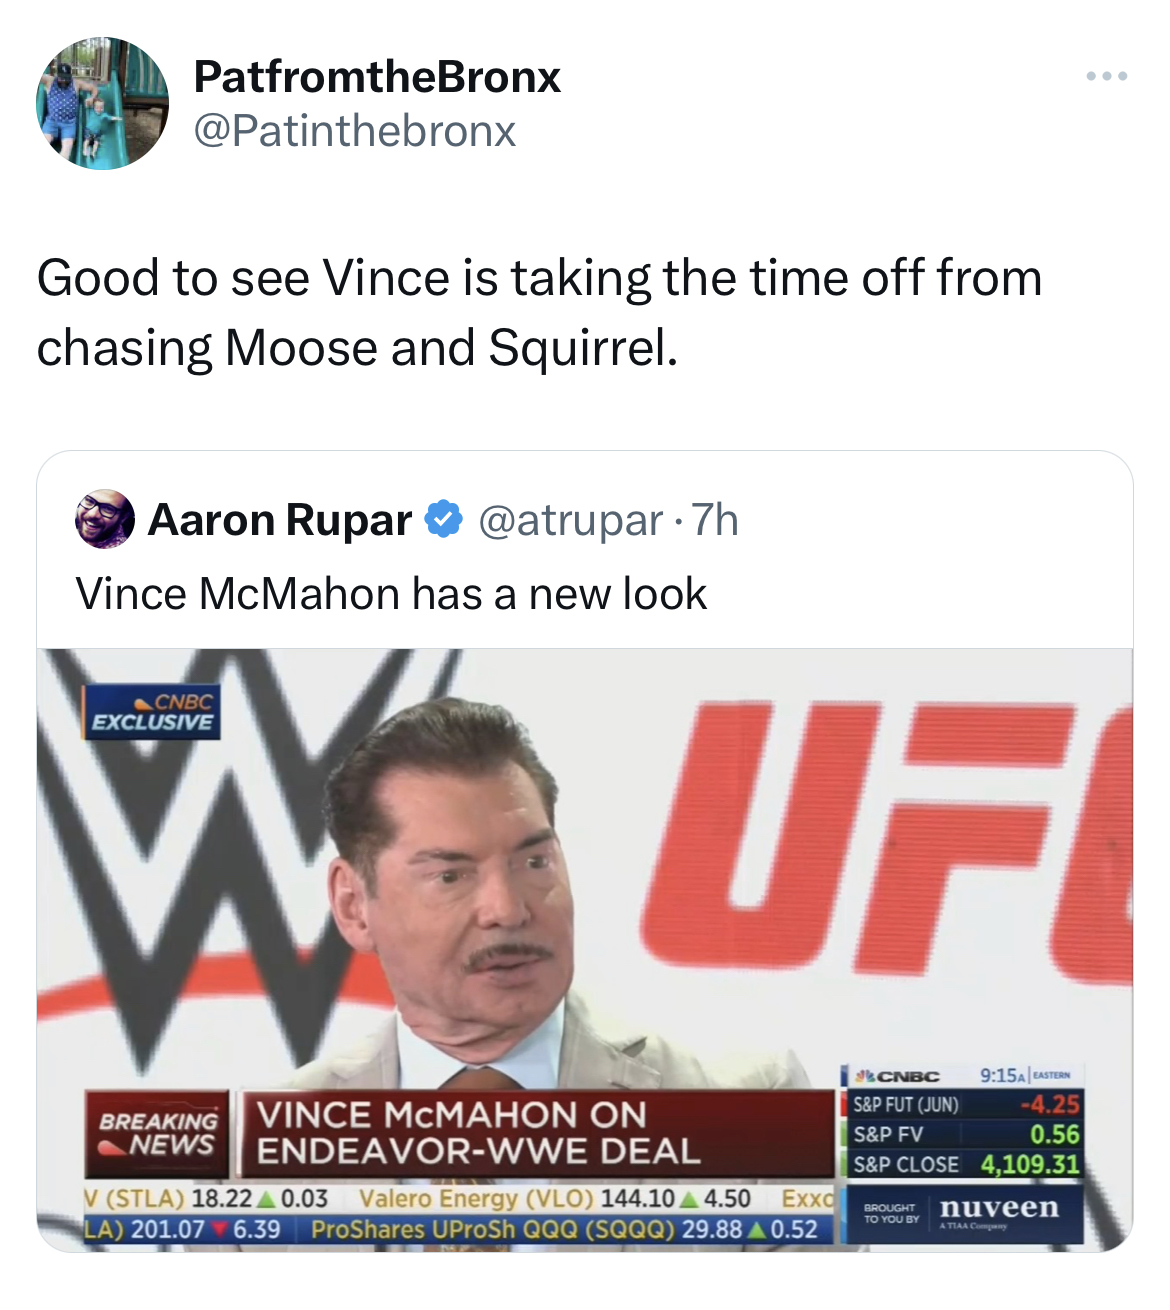 Vince McMahon Mustache memes - media - PatfromtheBronx Good to see Vince is taking the time off from chasing Moose and Squirrel. Aaron Rupar Vince McMahon has a new look V Cnbc Exclusive Uf Breaking News Vince Mcmahon On EndeavorWwe Deal V Stla 18.22 0.03